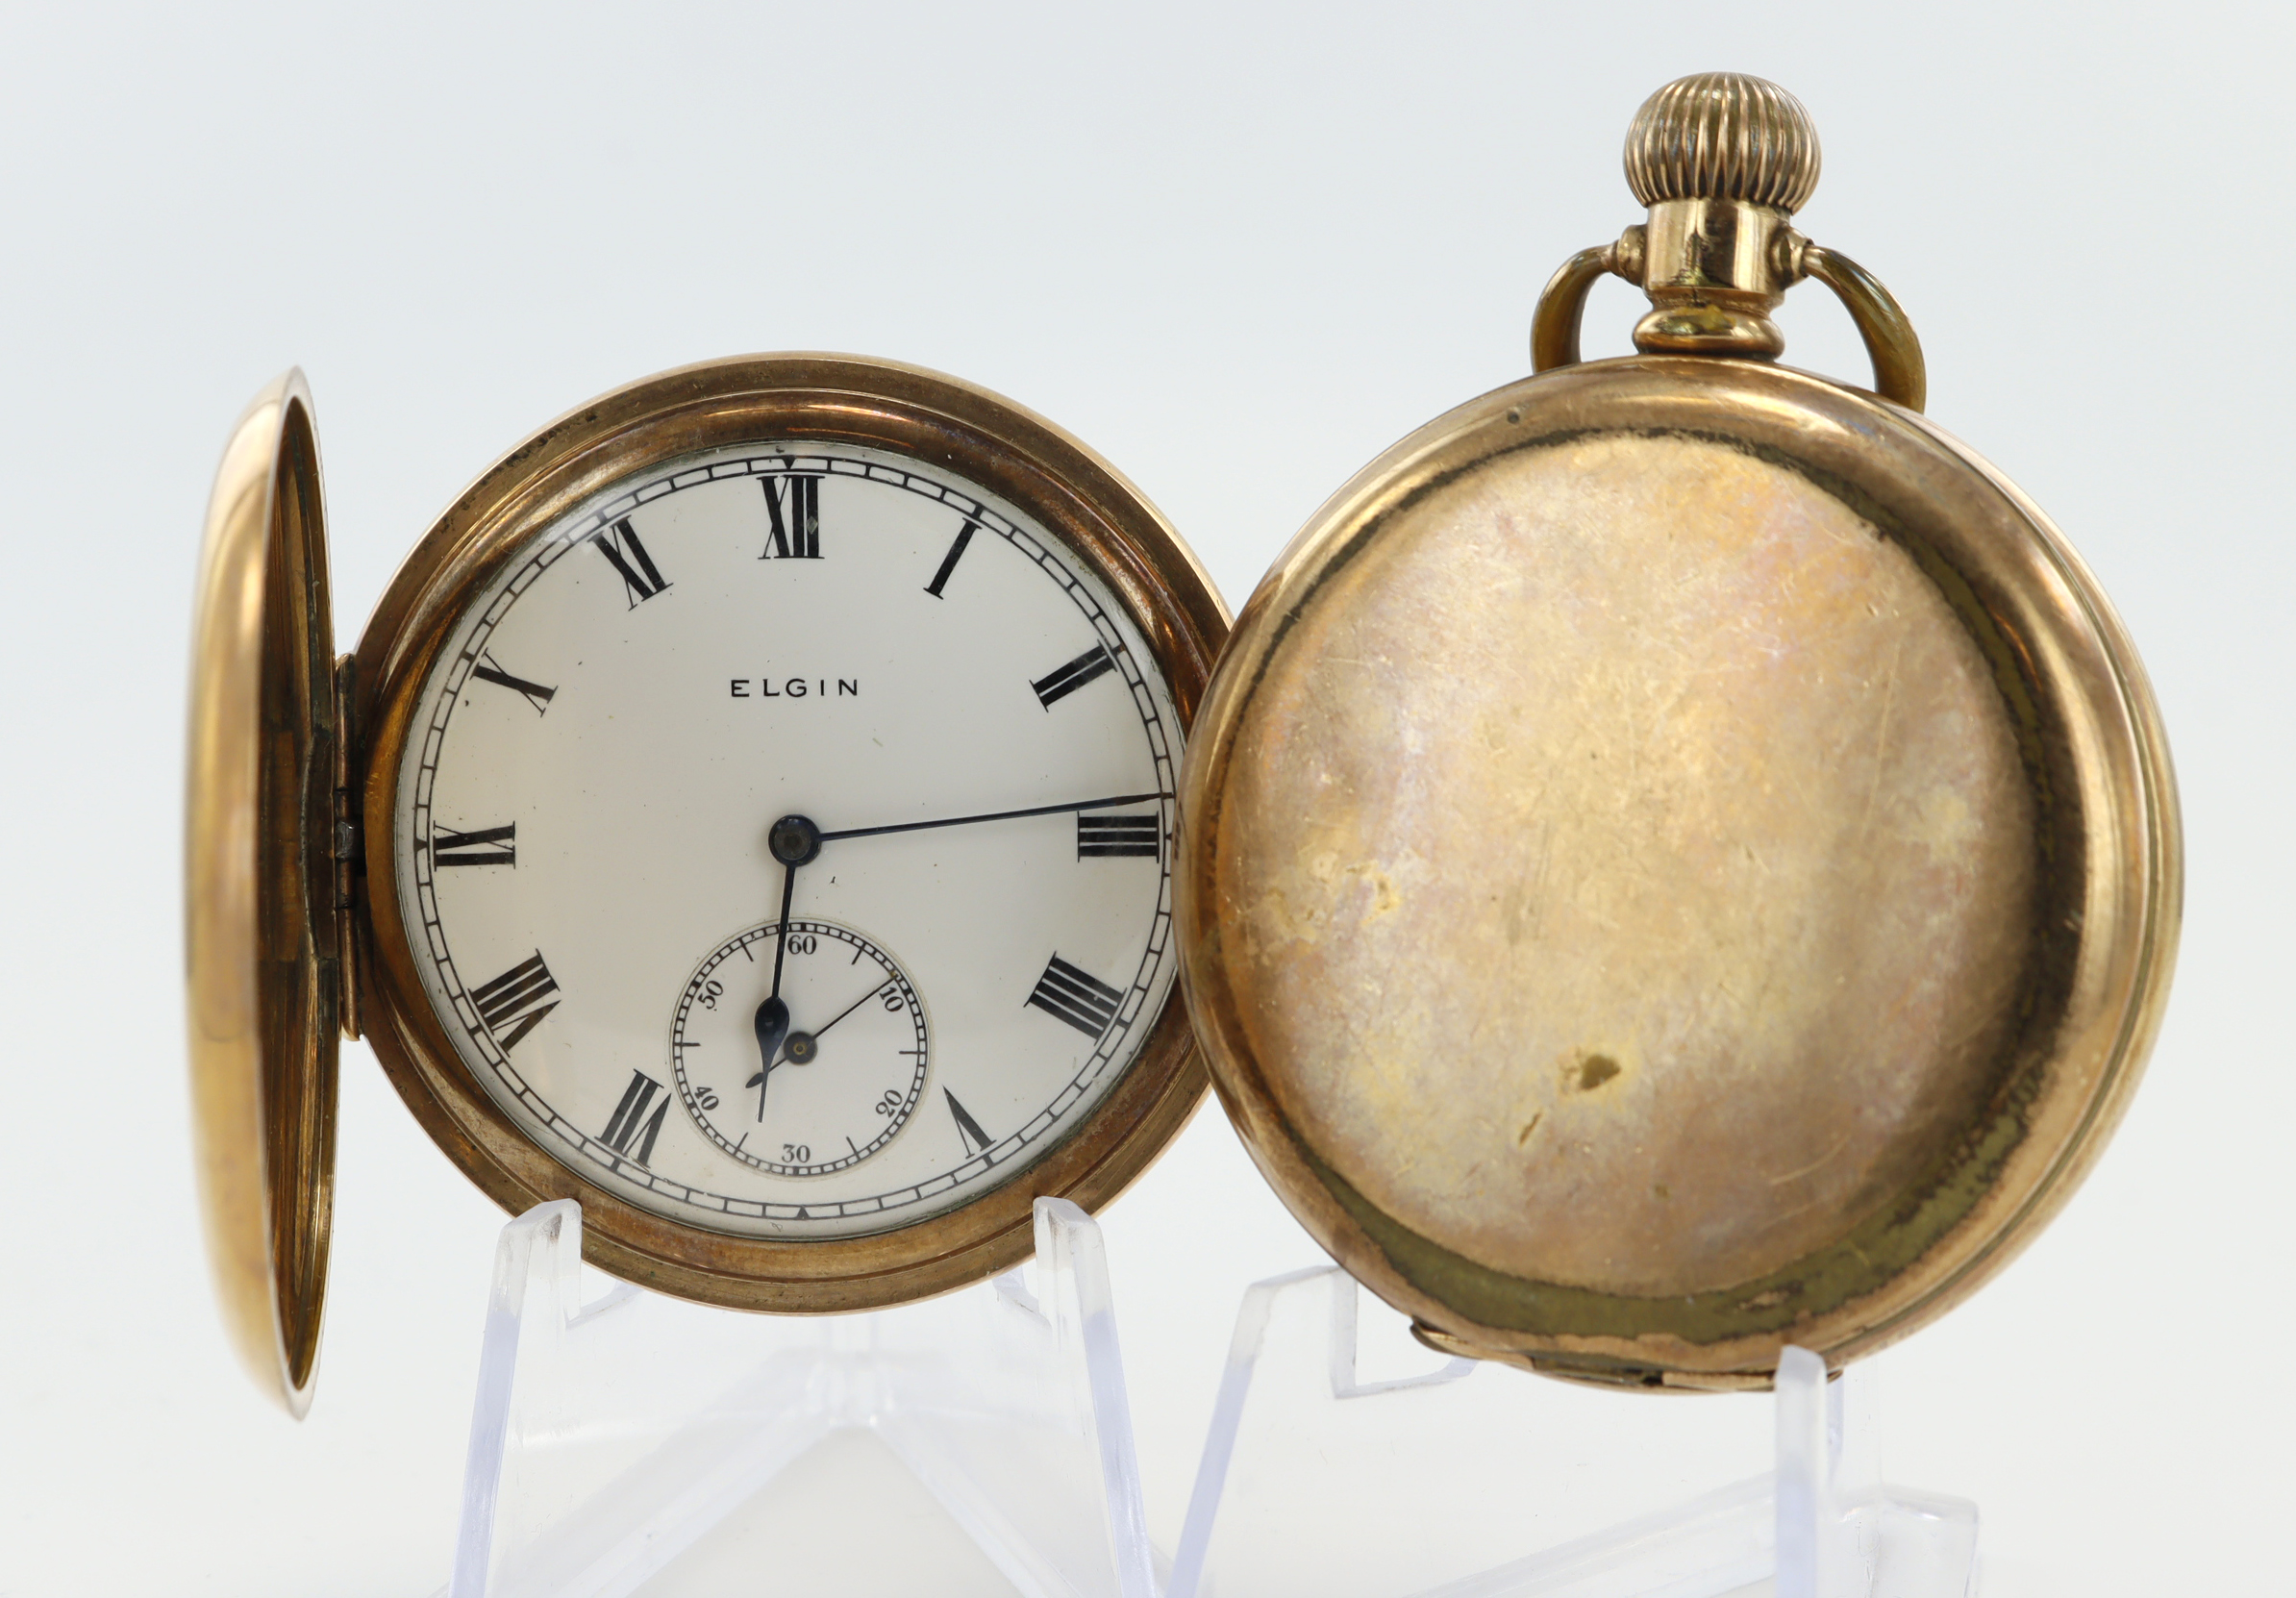 Two gents gold plated full hunter stem-wind pocketwatches, one by Waltham, the other Elgin. Both